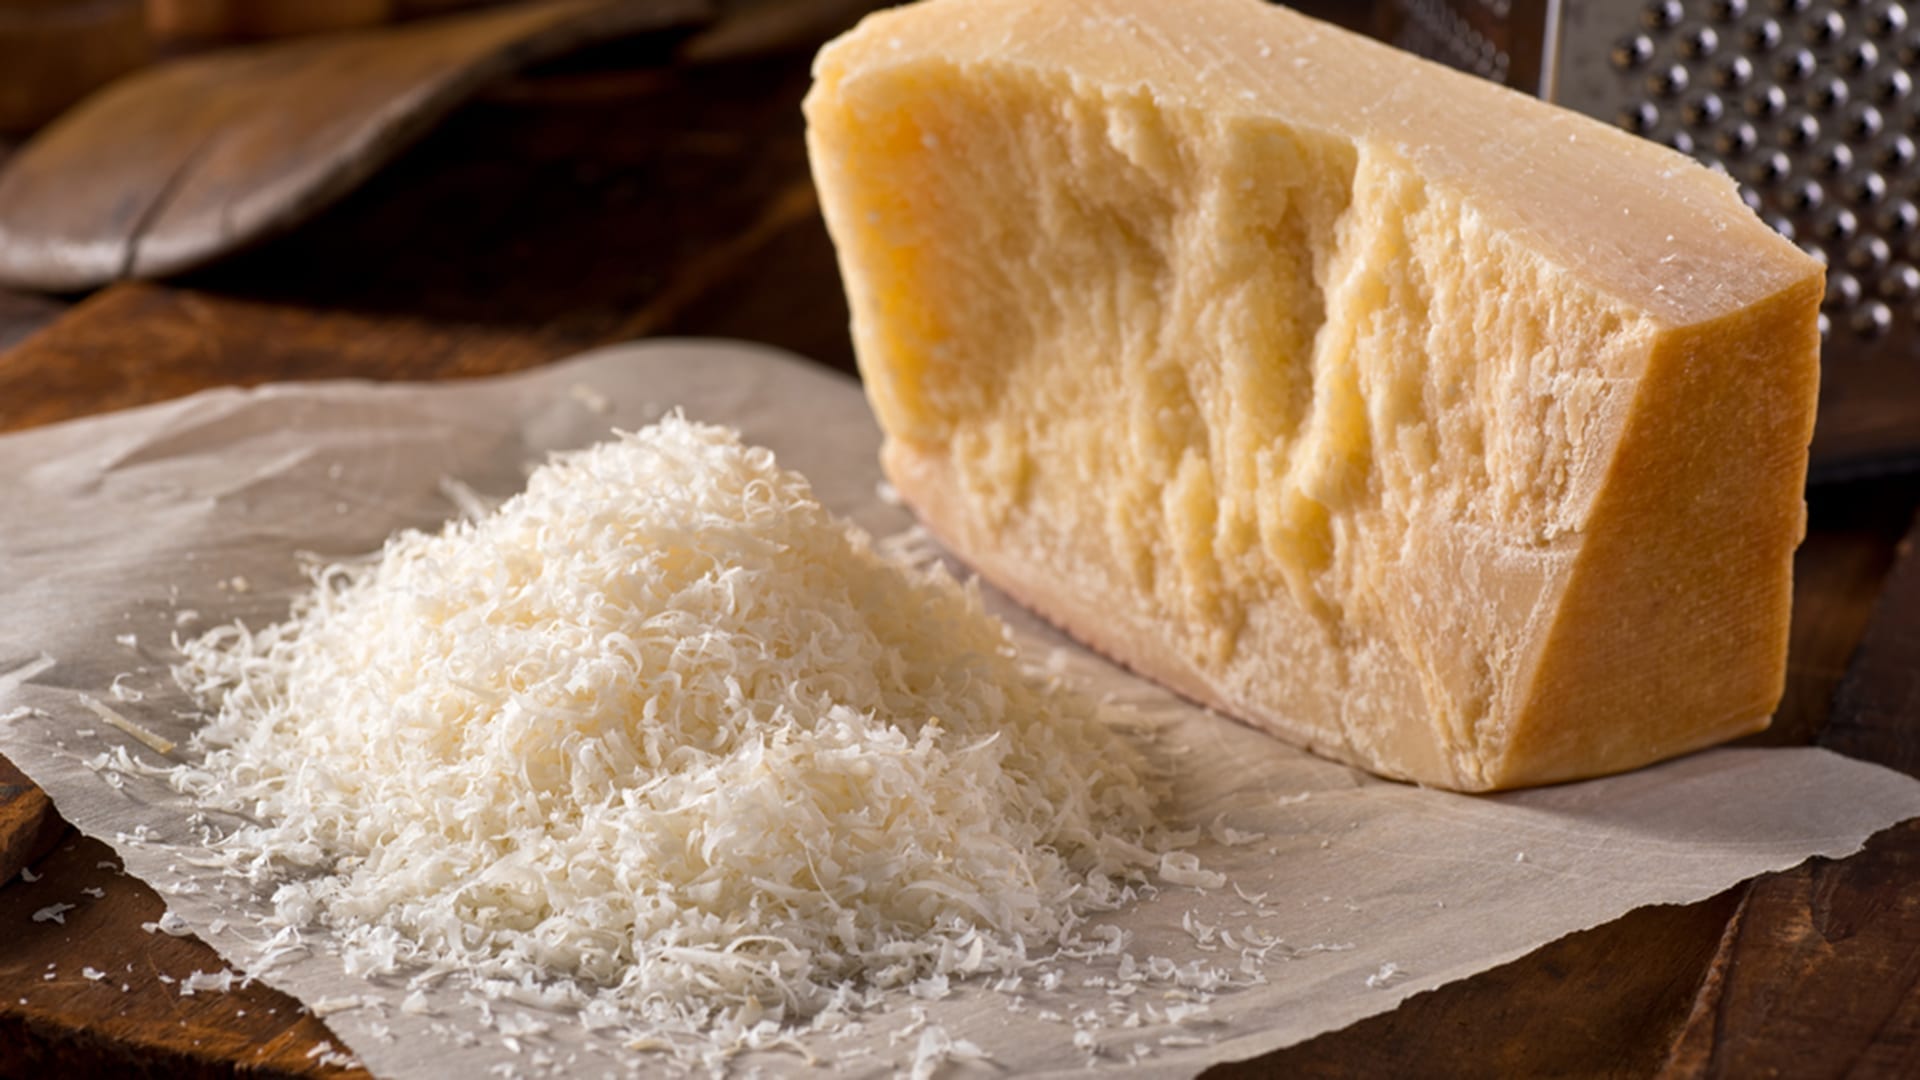 10 Cheesy Facts About the Parmesan Cheese That Came From Italy 1